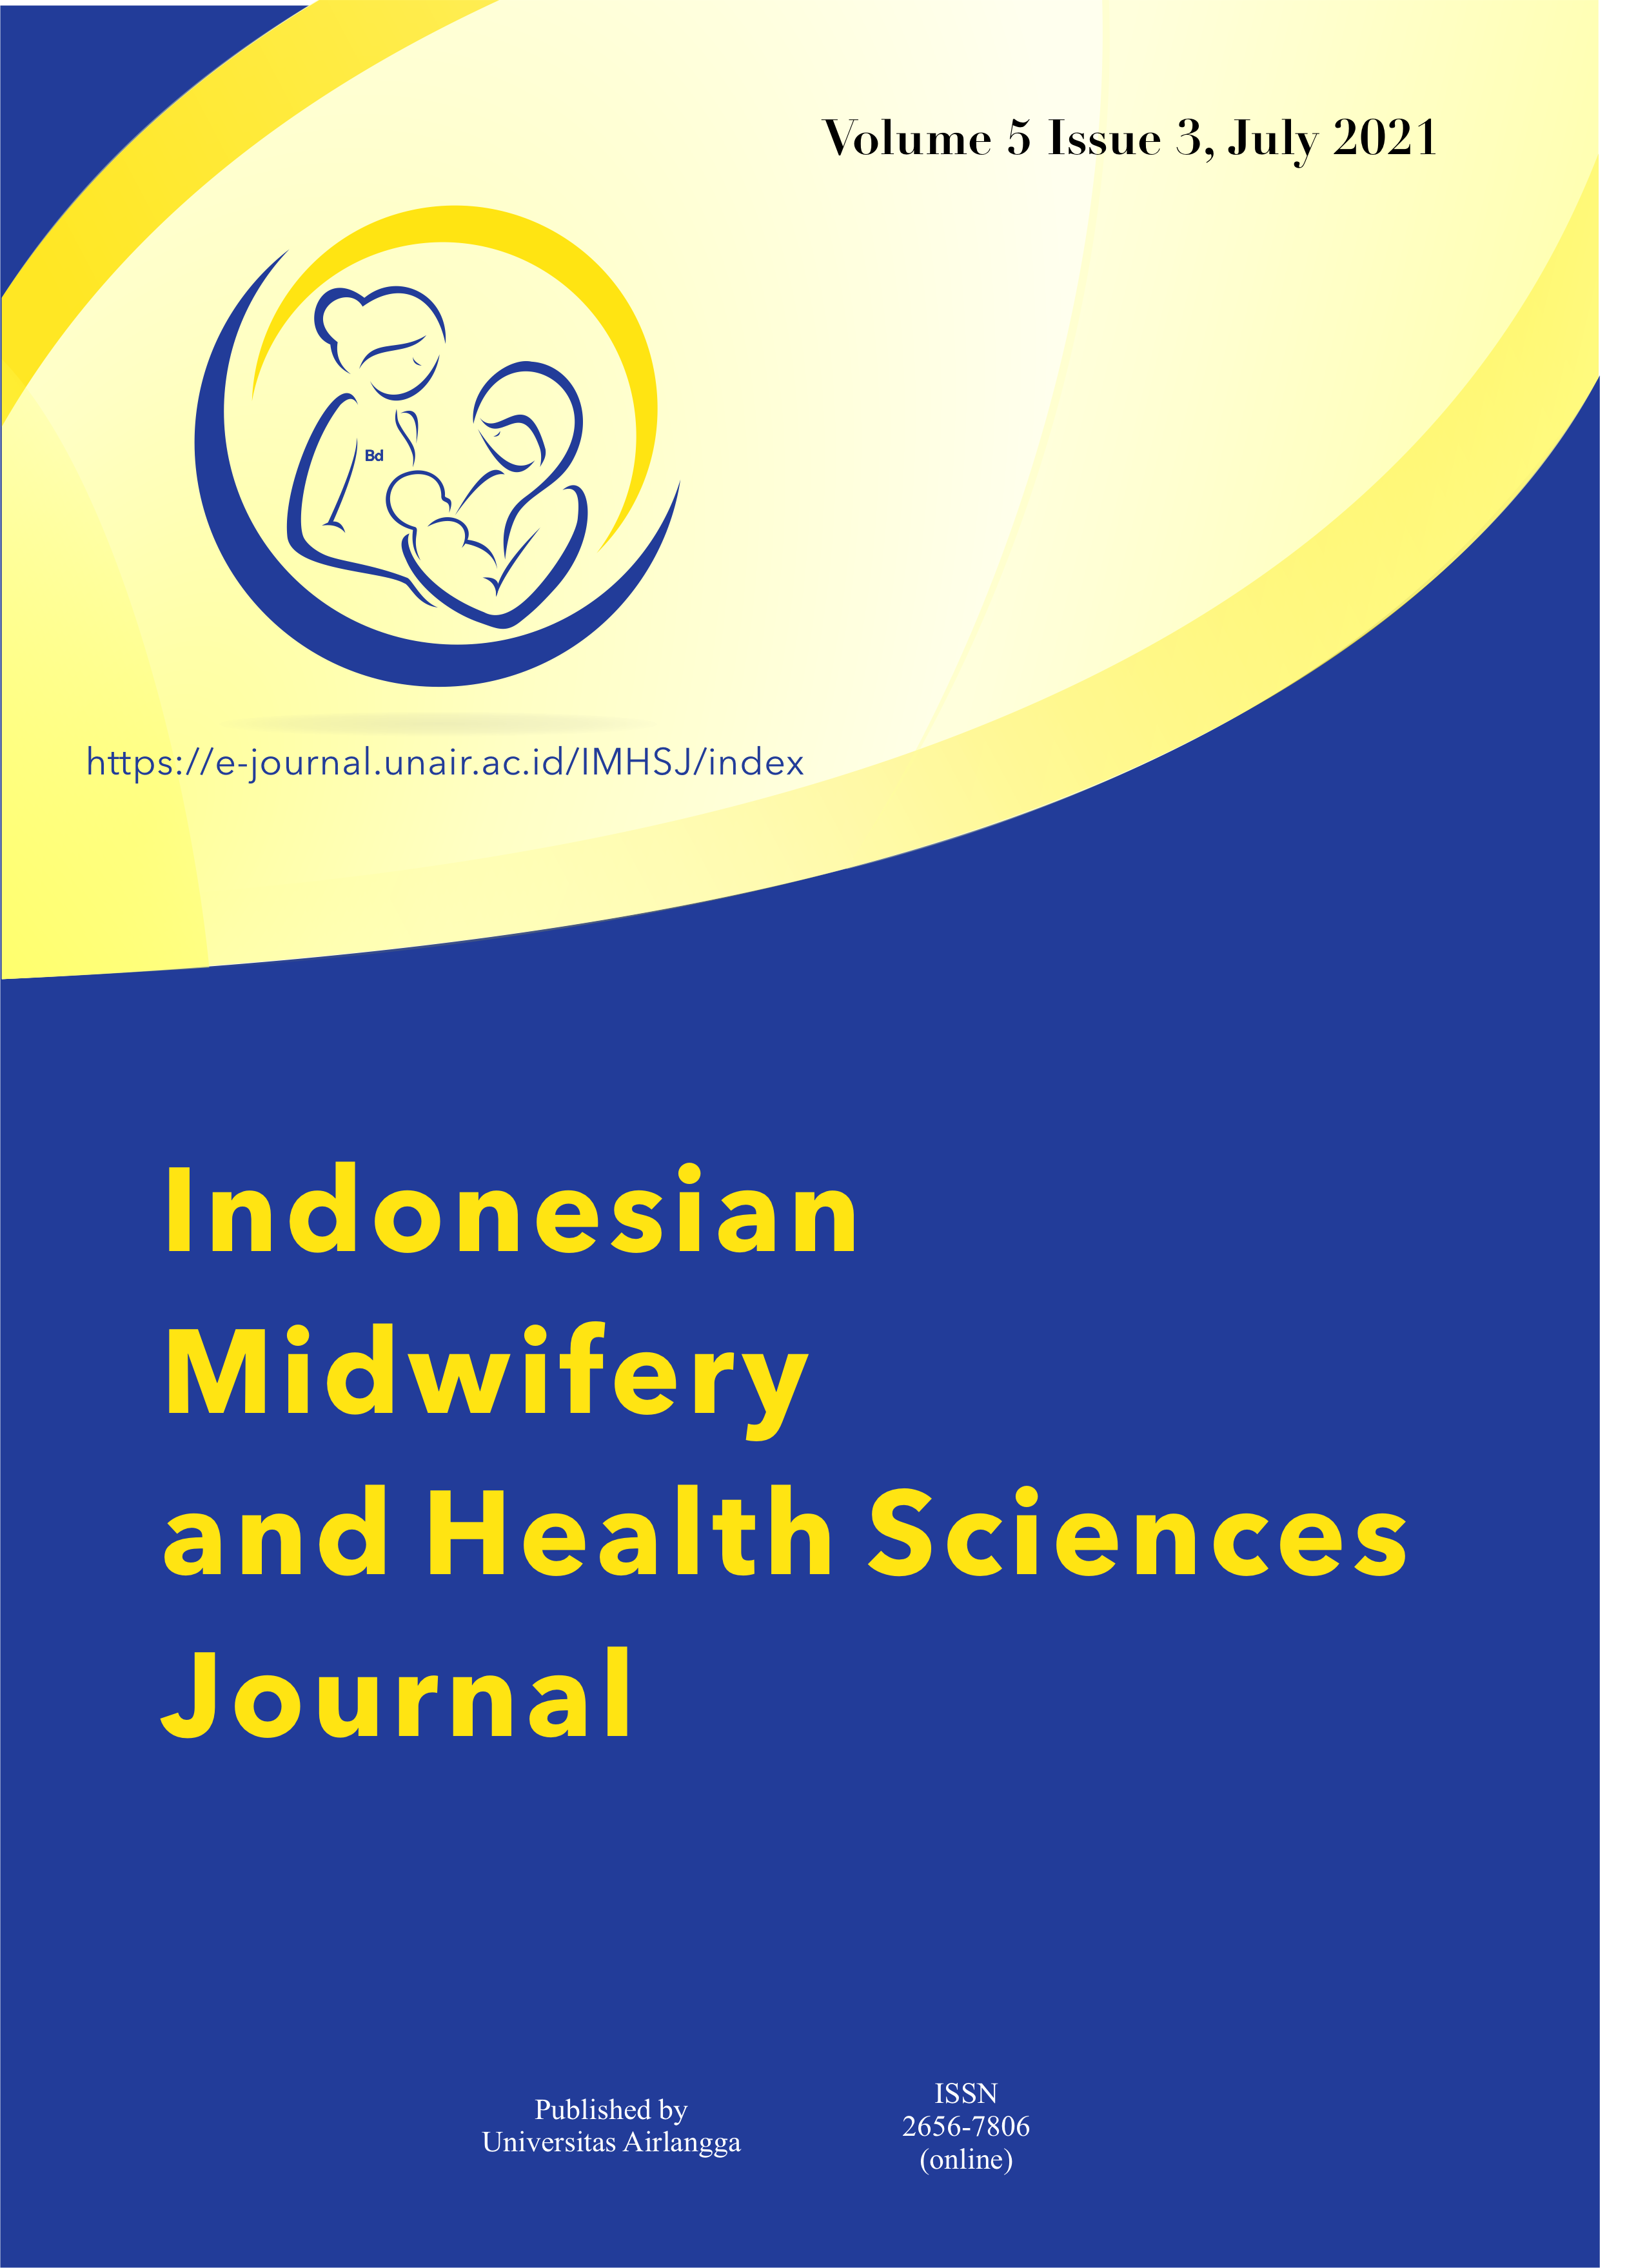 						View Vol. 5 No. 3 (2021): Indonesian Midwifery and Health Sciences Journal, July 2021
					